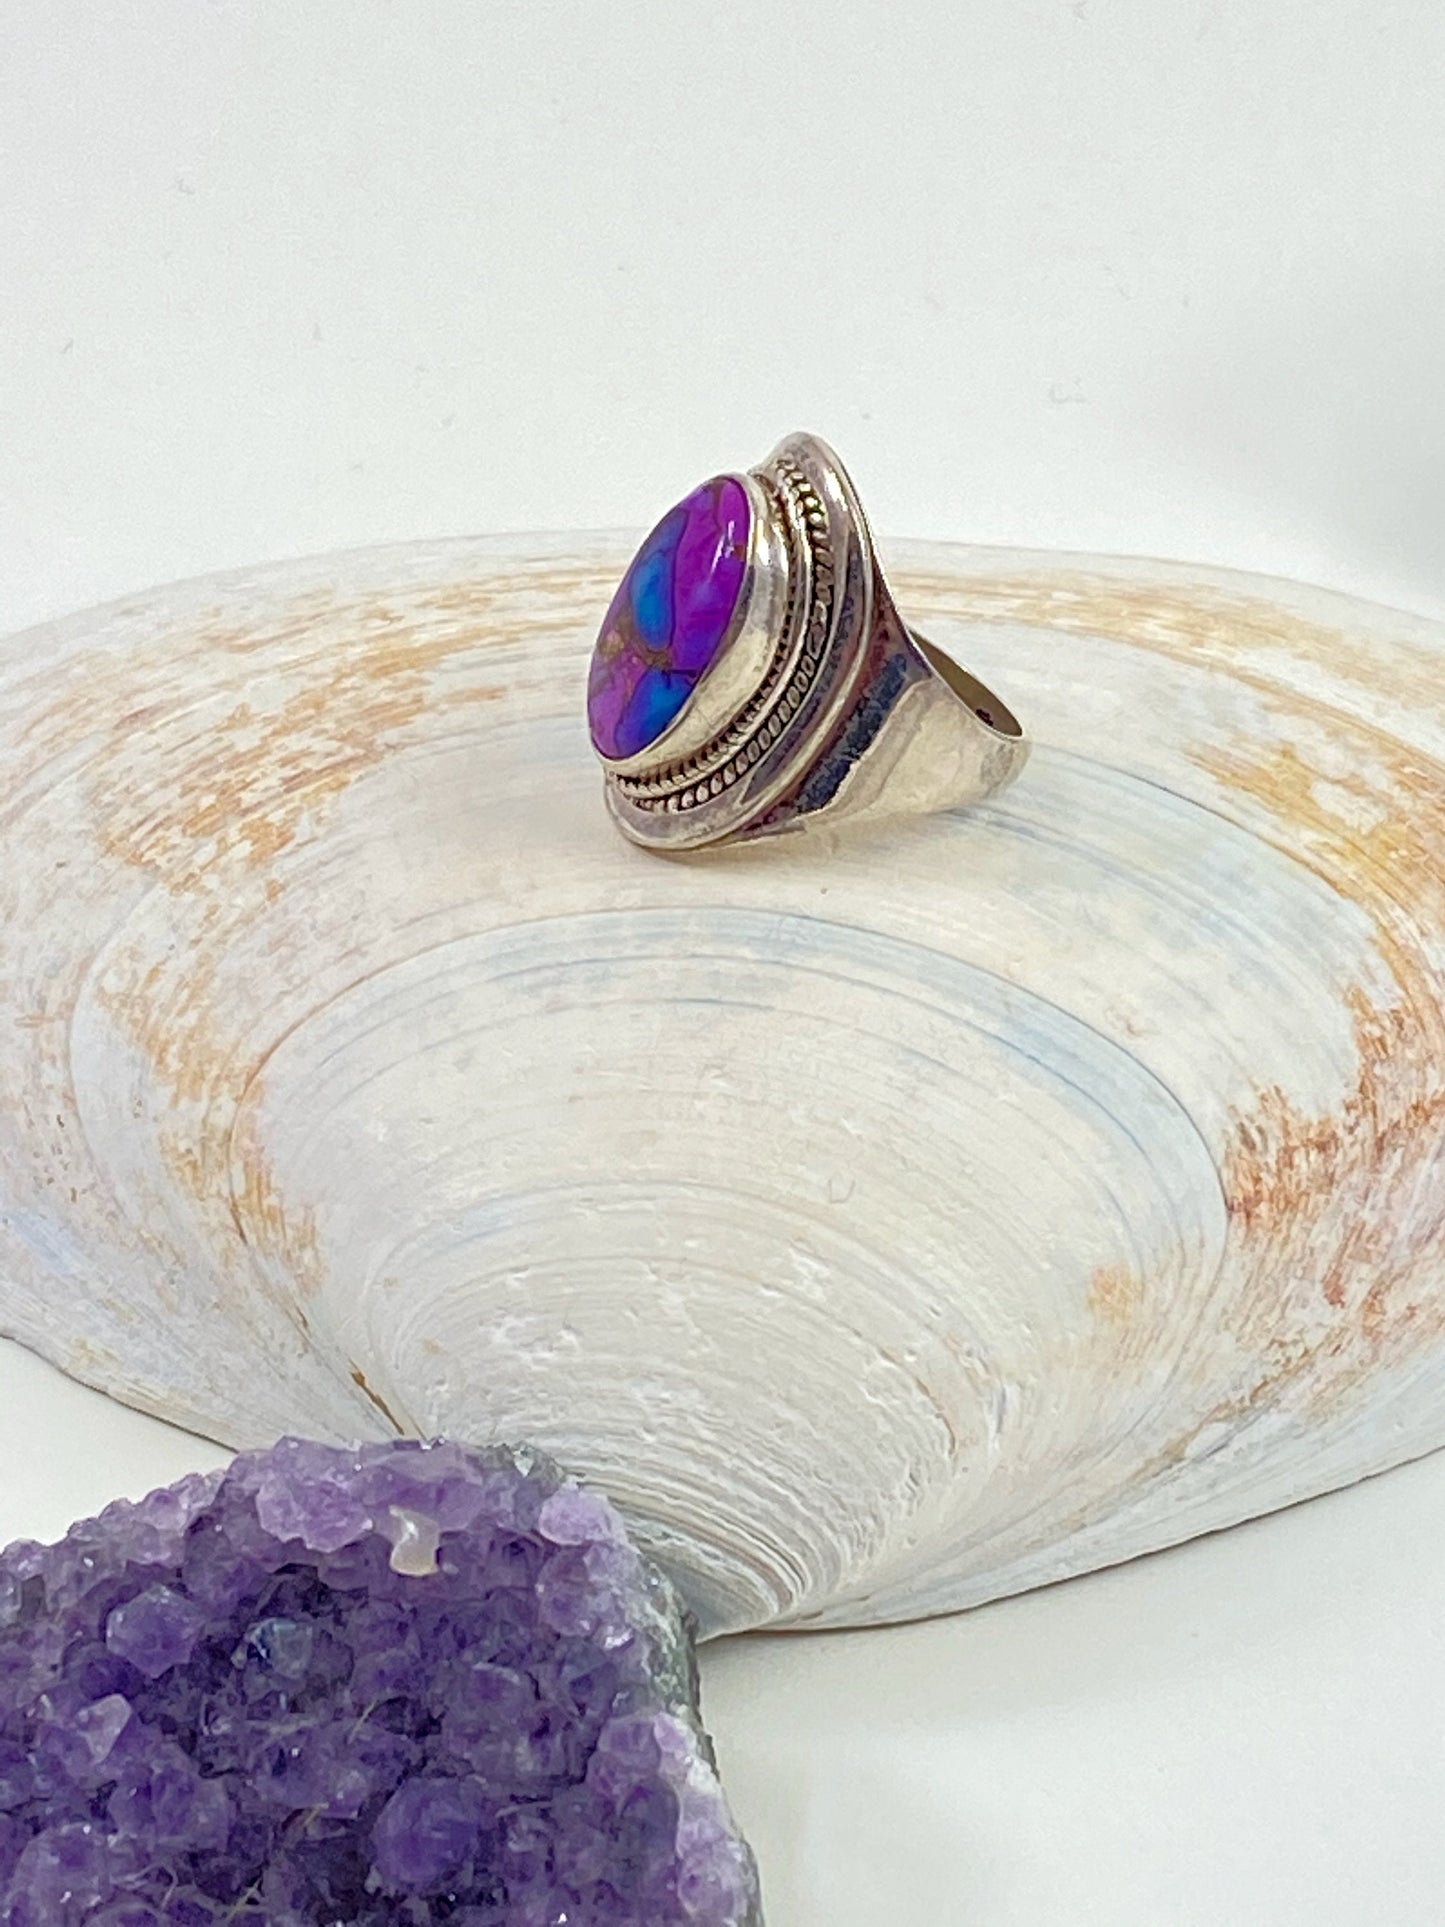 Gorgeous handmade purple, blue and copper turquoise and sterling silver ring. This is a size 6 stunning ring.